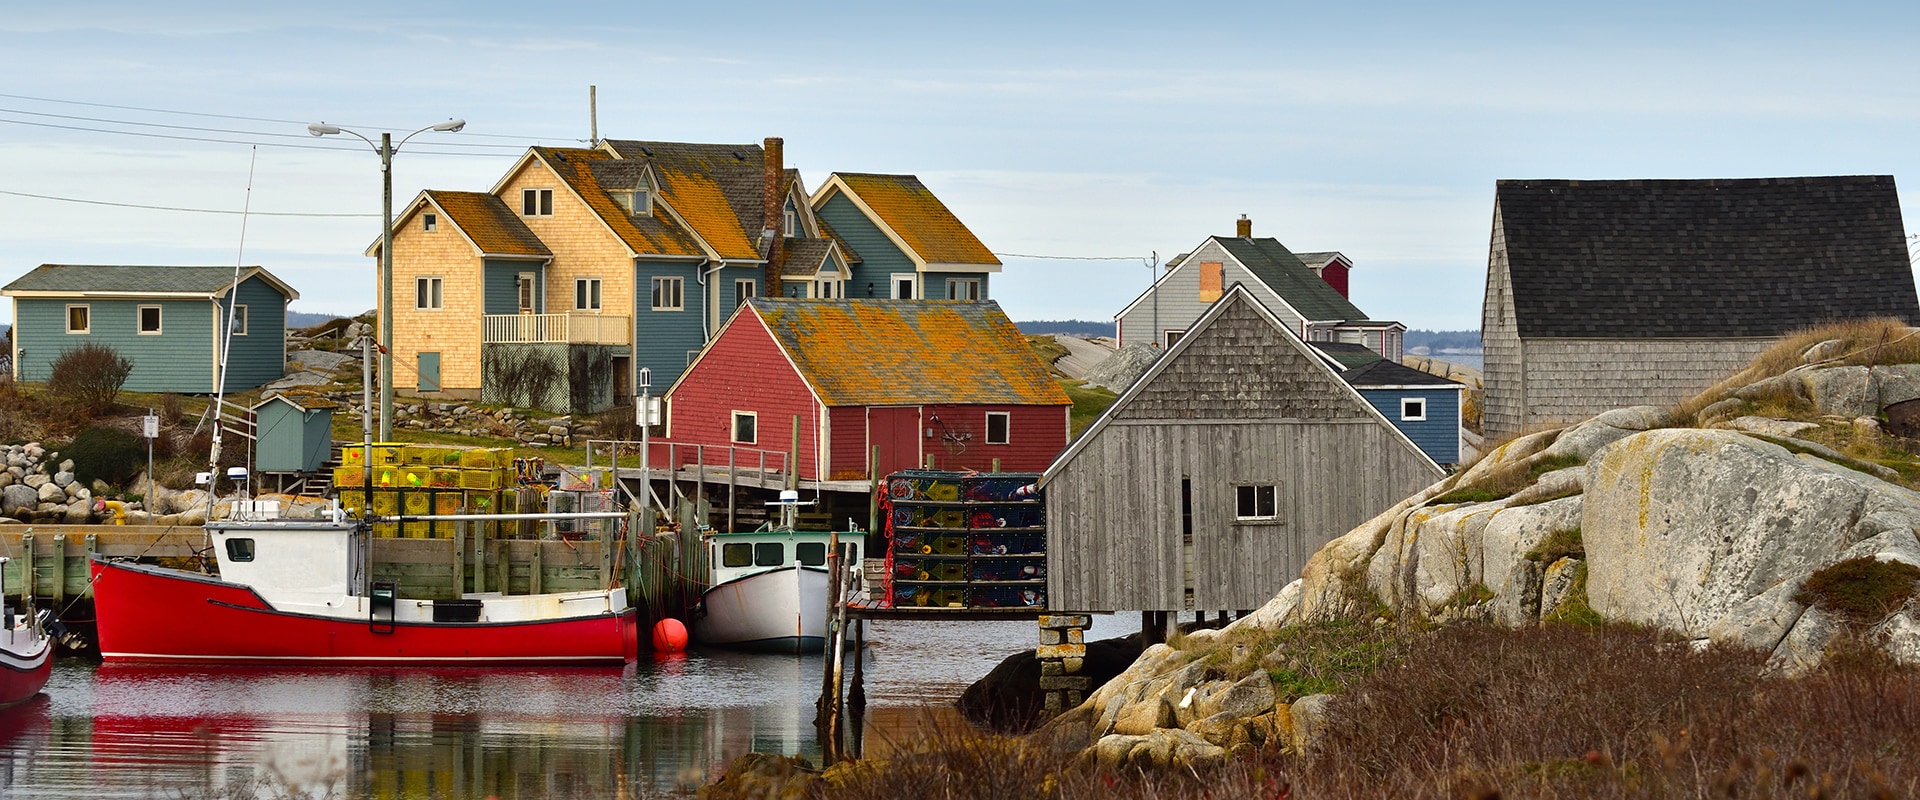 Colorful wooden houses built along the harbor with a red and white boat tied up at pier